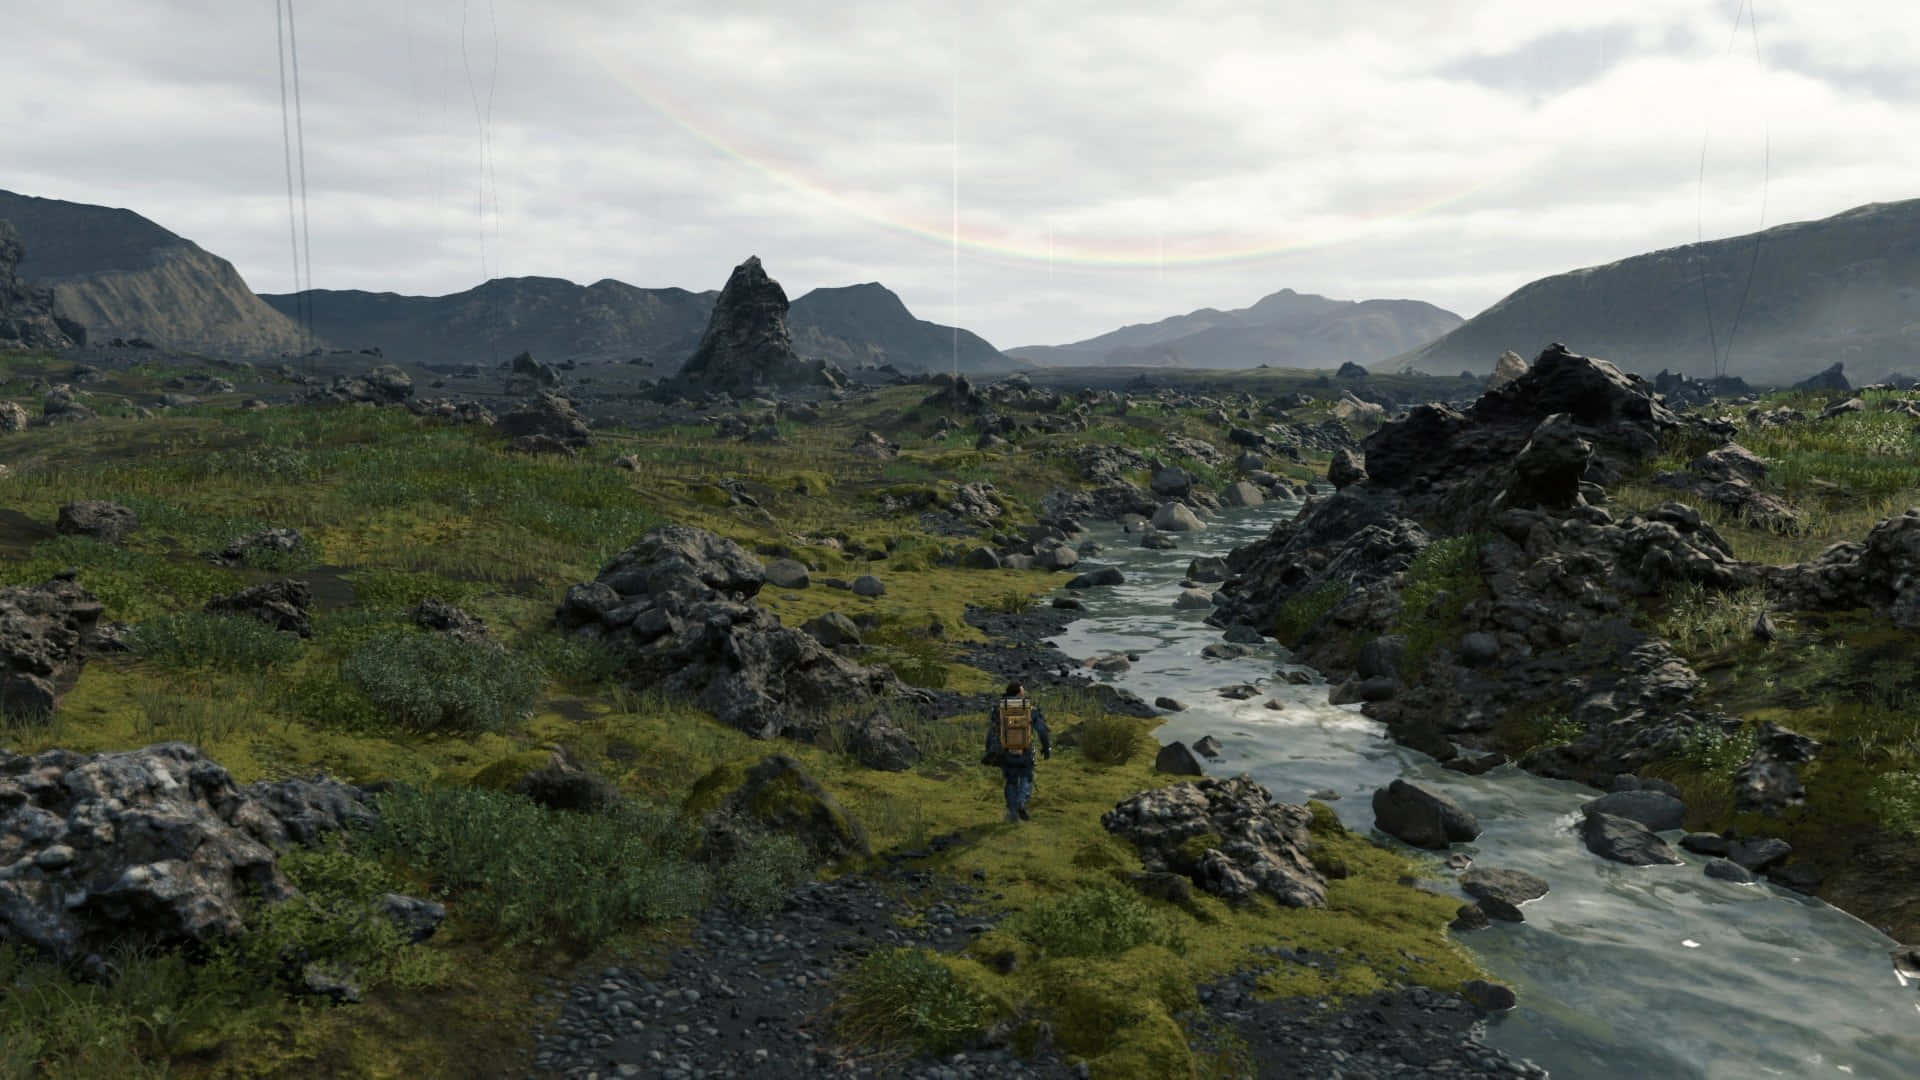 Explore a Distinctly Post-Apocalyptic World in Death Stranding